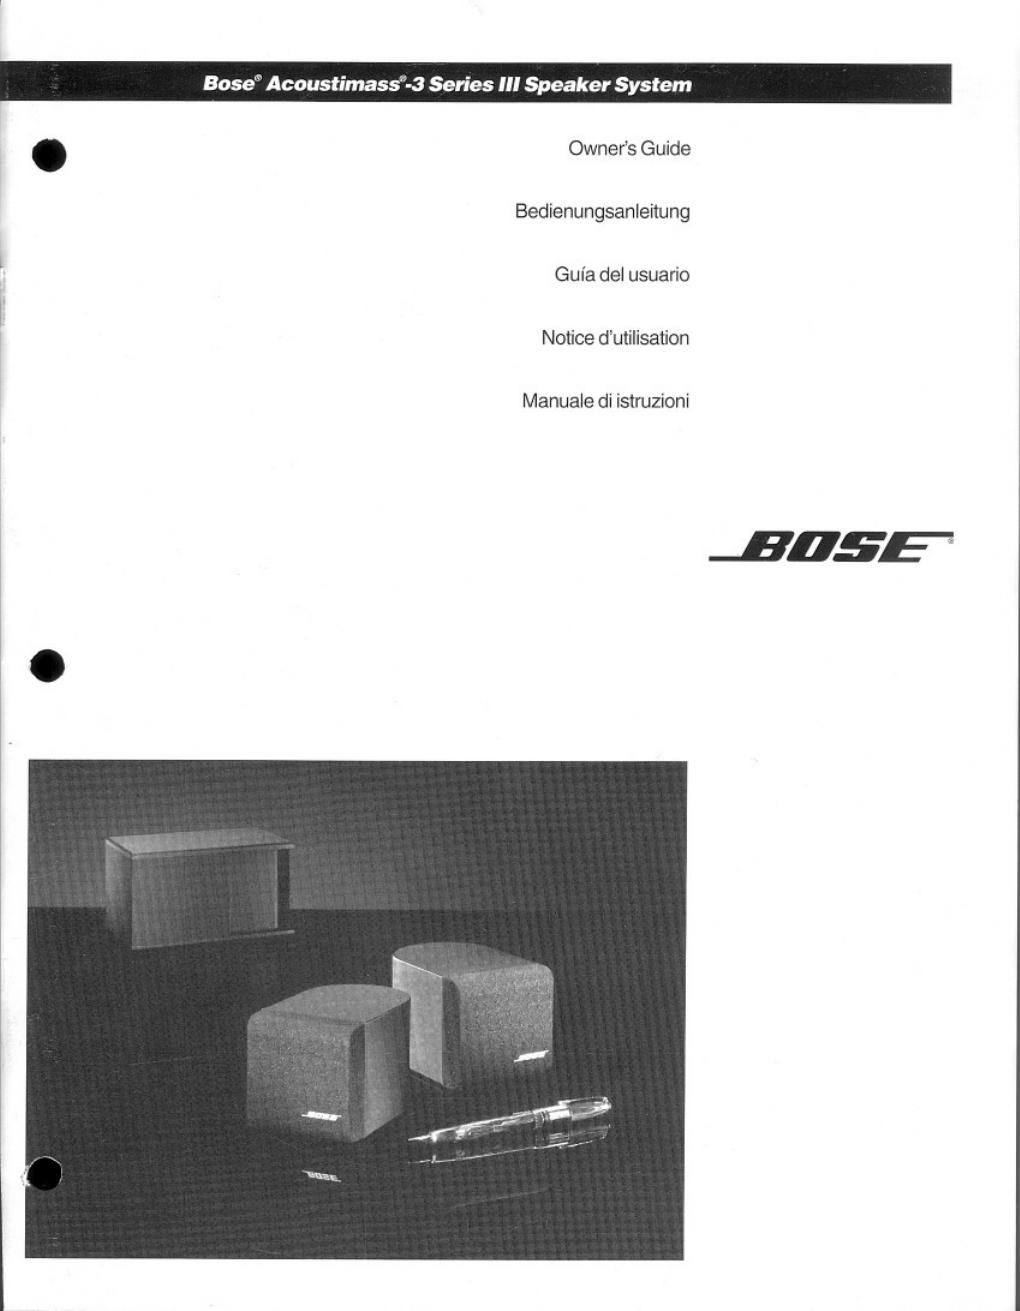 bose acoustimass 3 series iii owners guide